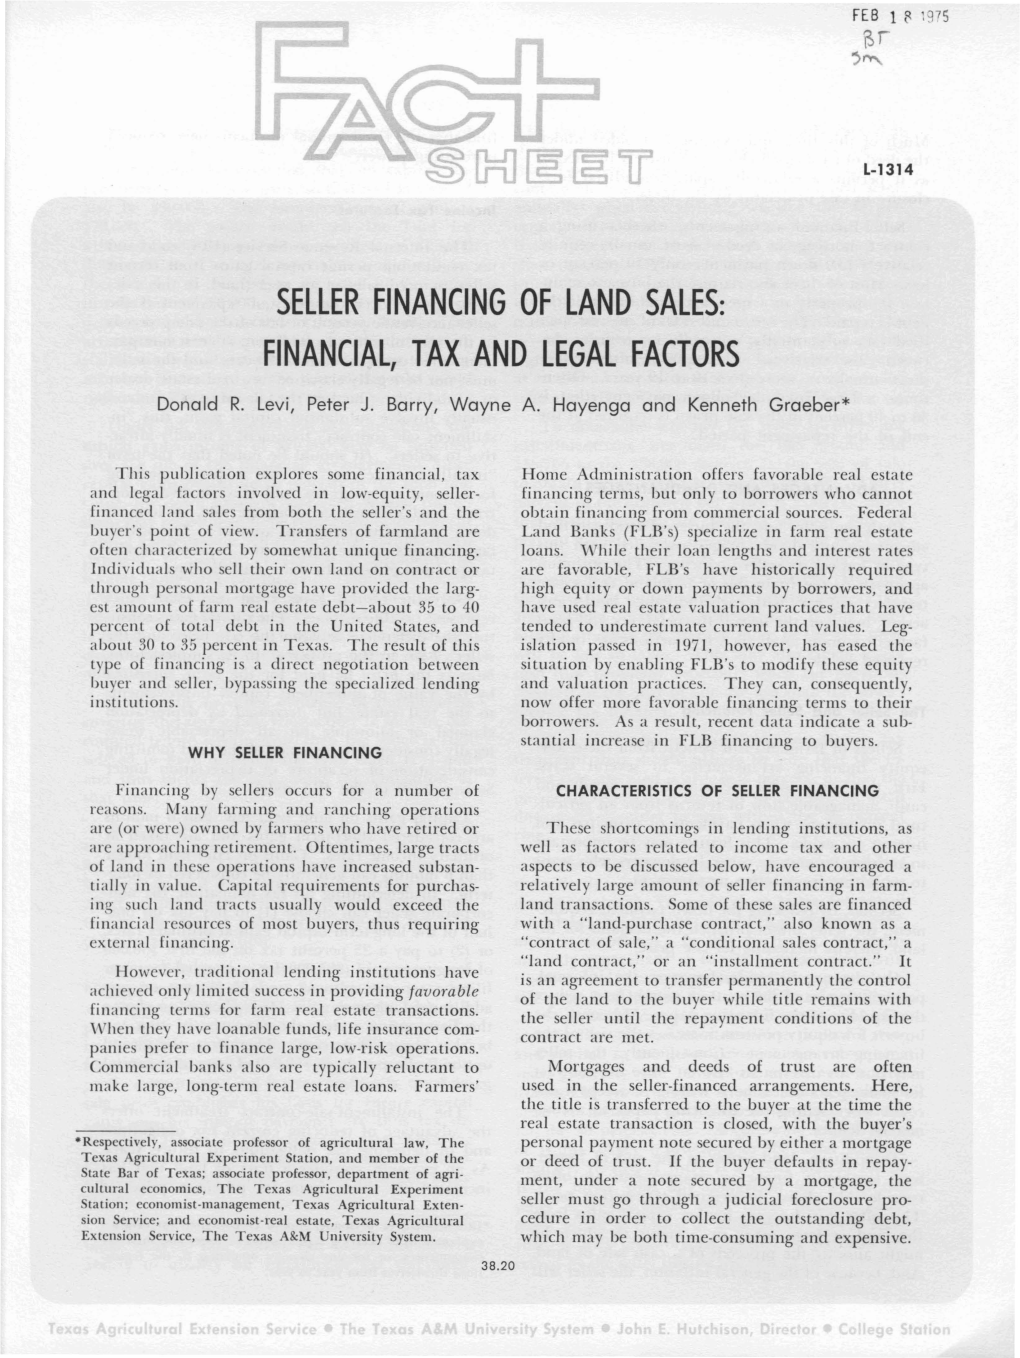 Seller Financing of Land Sales: Financial, Tax and Legal Factors